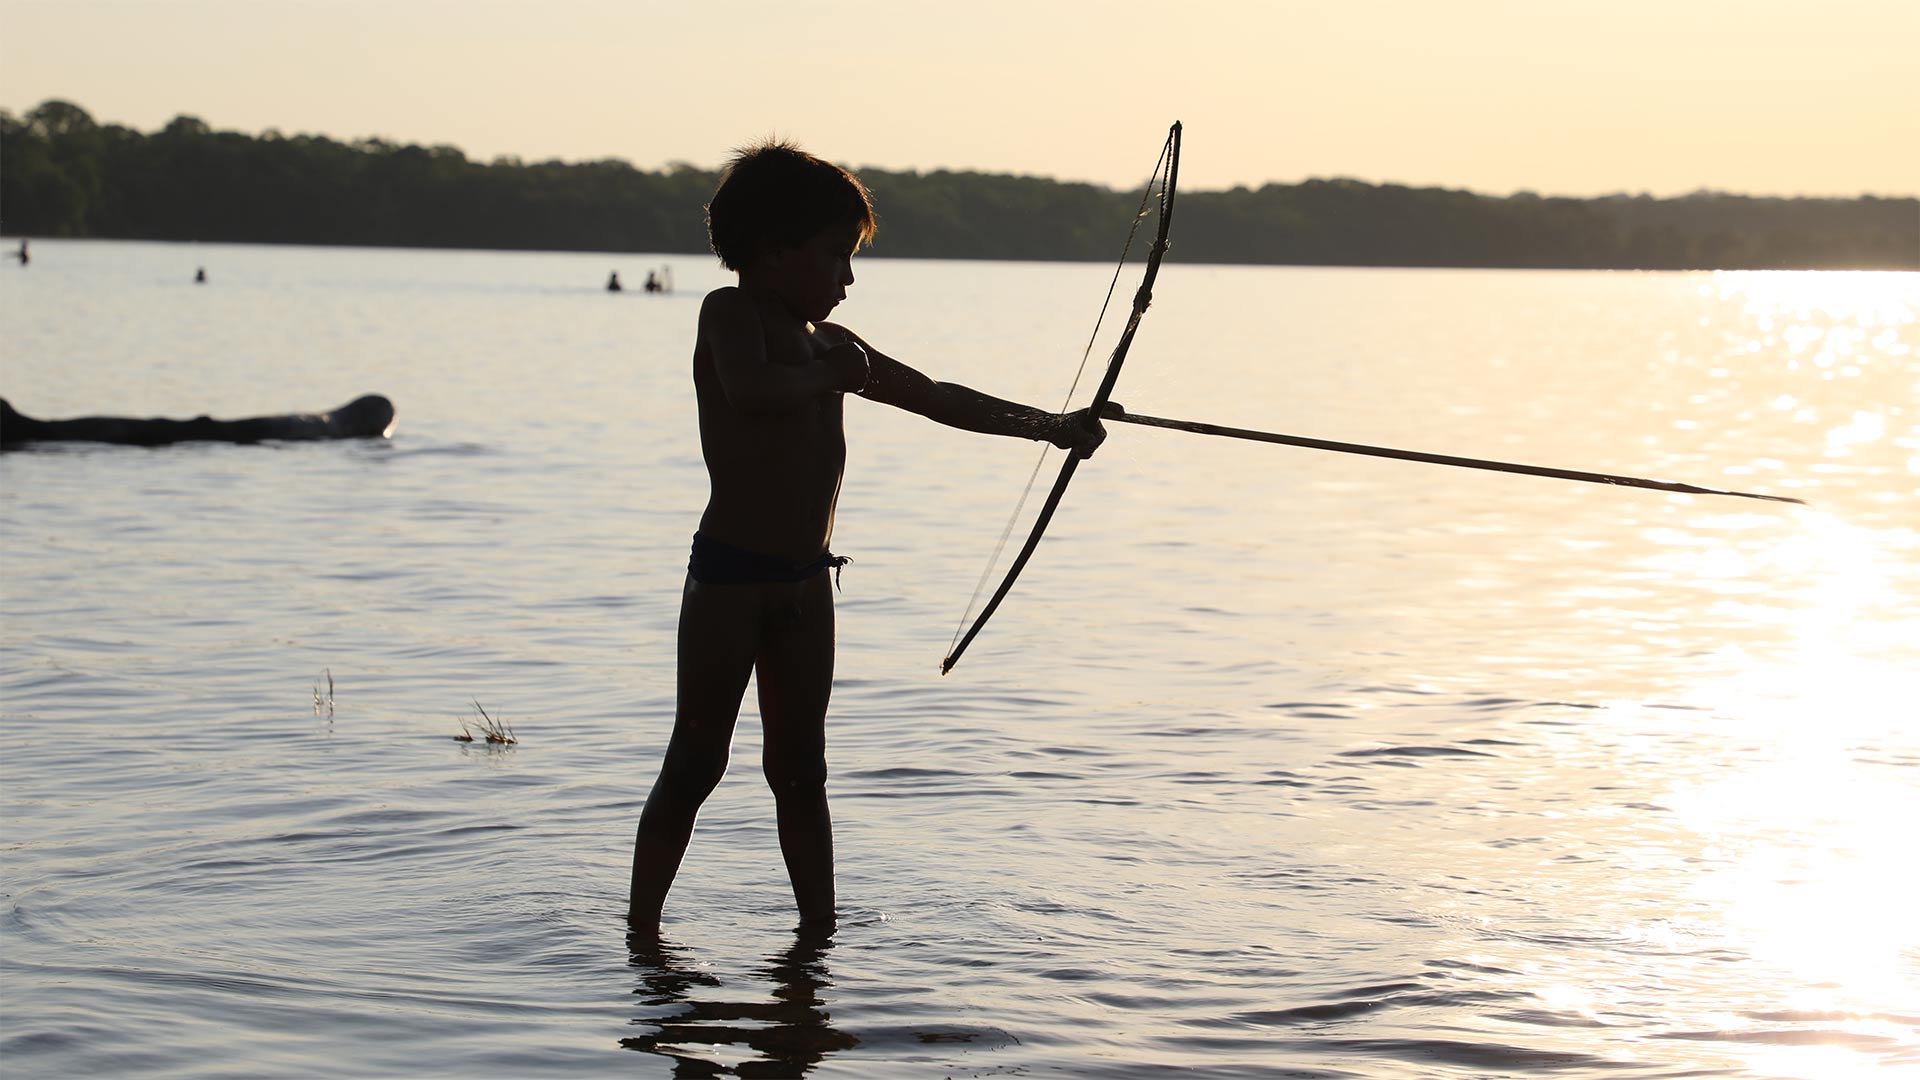 Child fishing with bow and arrow in Matto Grosso, Brazil.